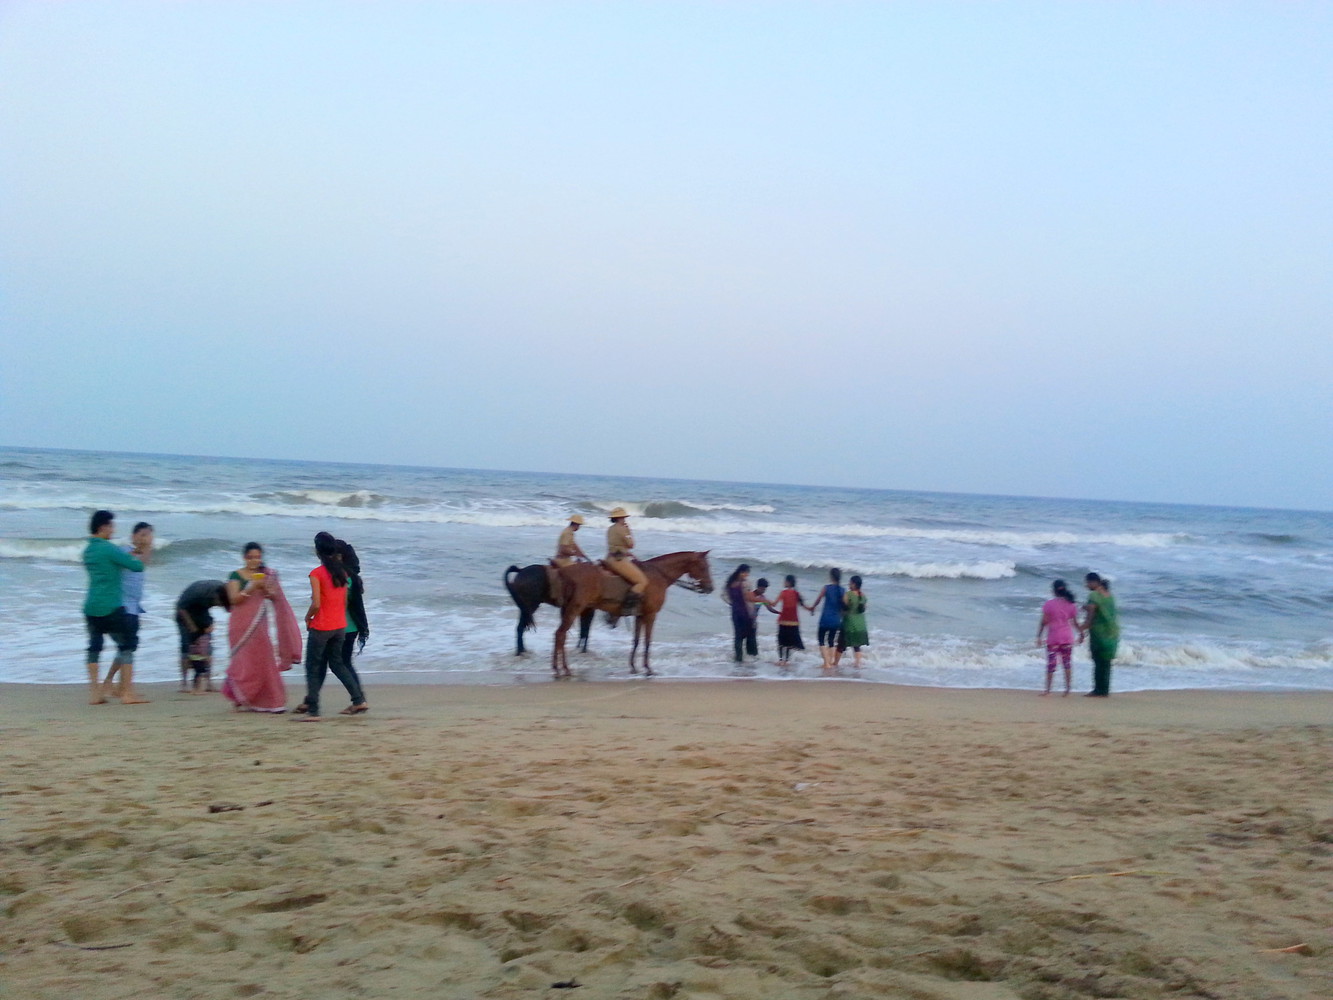 Visitors and cops on horses at a beach